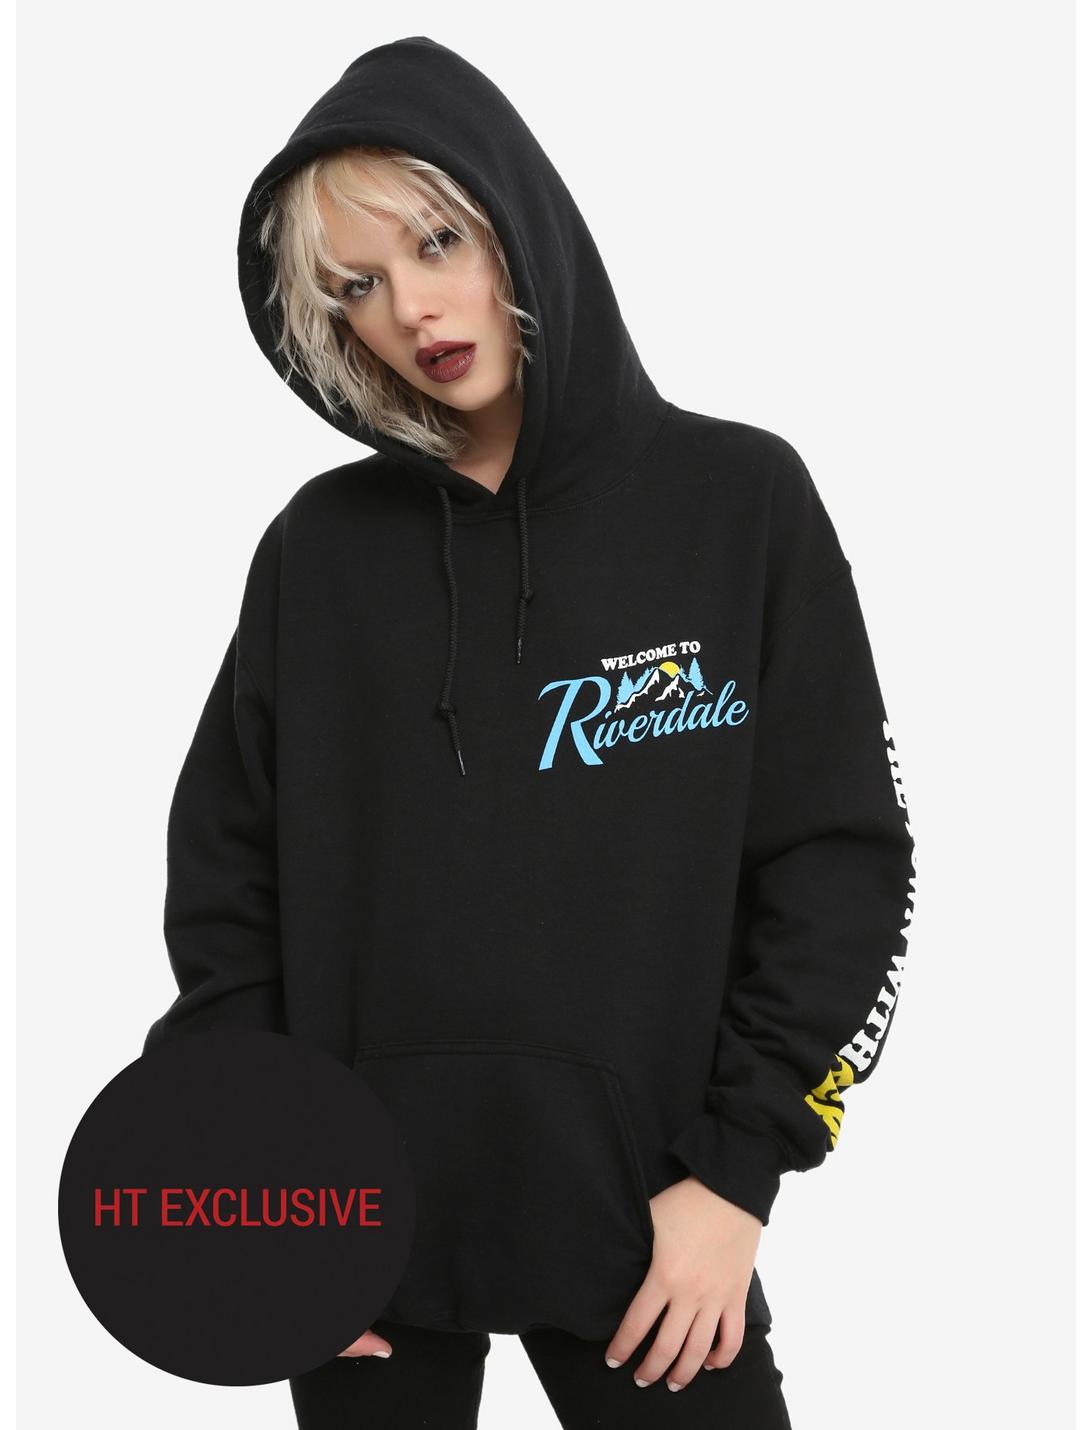 Riverdale Welcome To Riverdale Girls Hoodie Hot Topic Exclusive, MULTI, hi-res